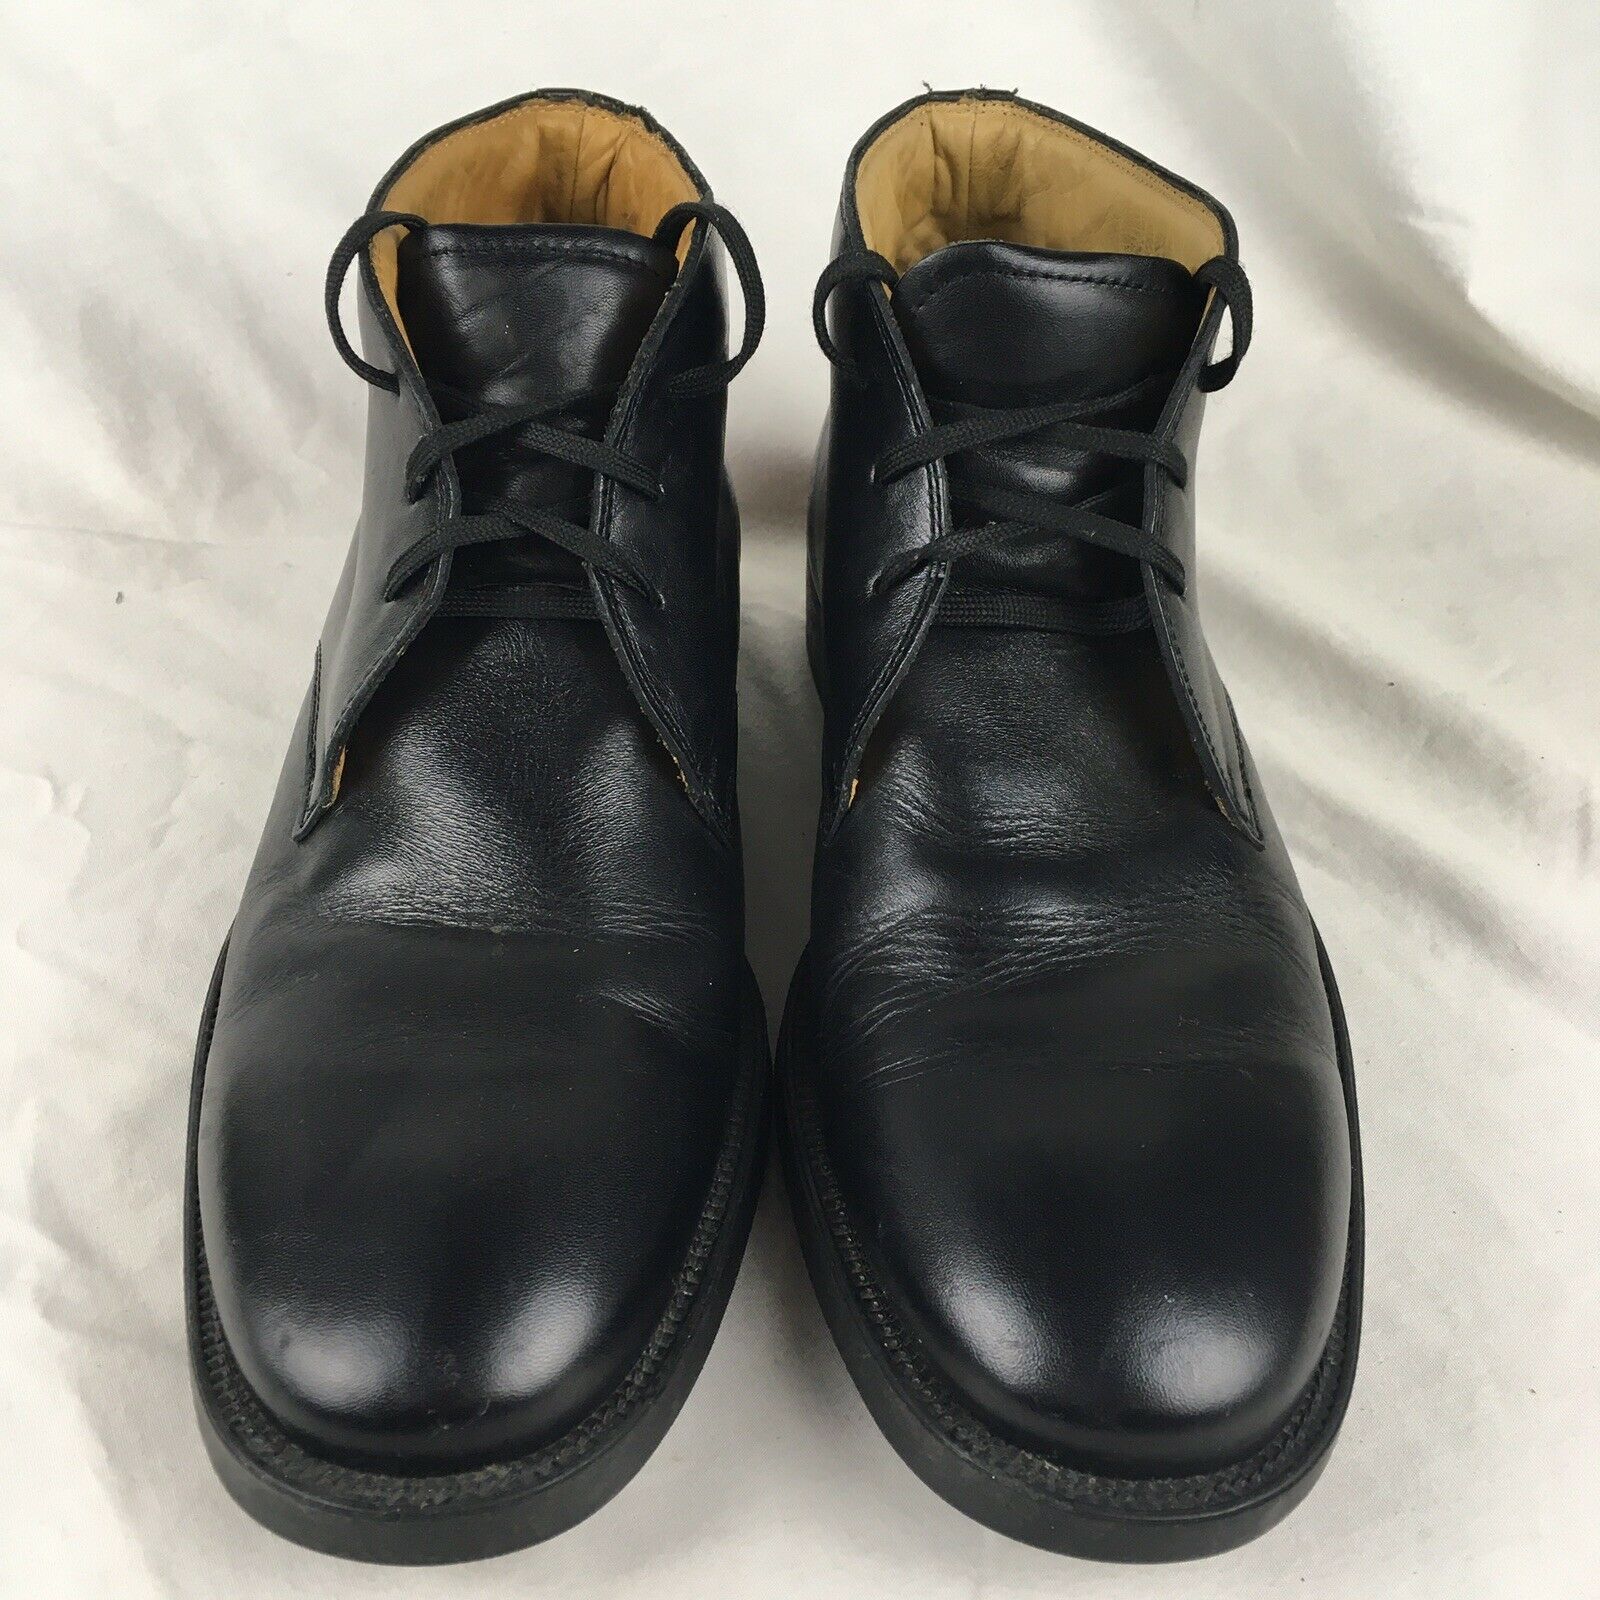 J Crew Leather Oxford Black High Top Sz 10H 10.5 Men's Dress Shoes Made In Italy